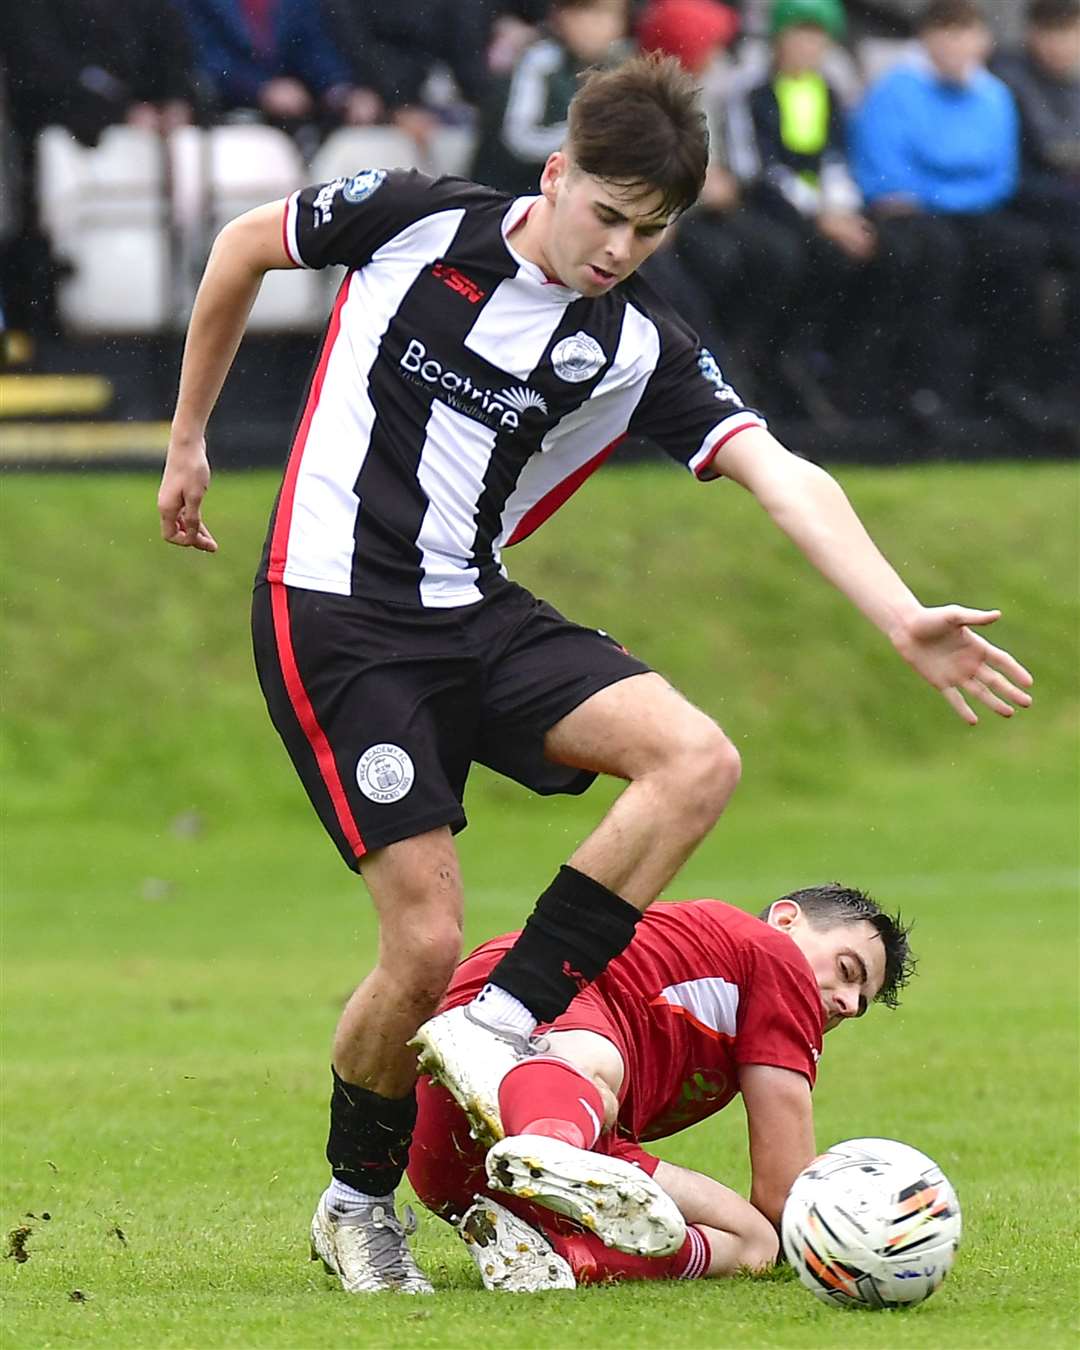 Lossiemouth's Liam Archibald stretches out a leg to stop Gary Pullen of Wick Academy. Picture: Mel Roger